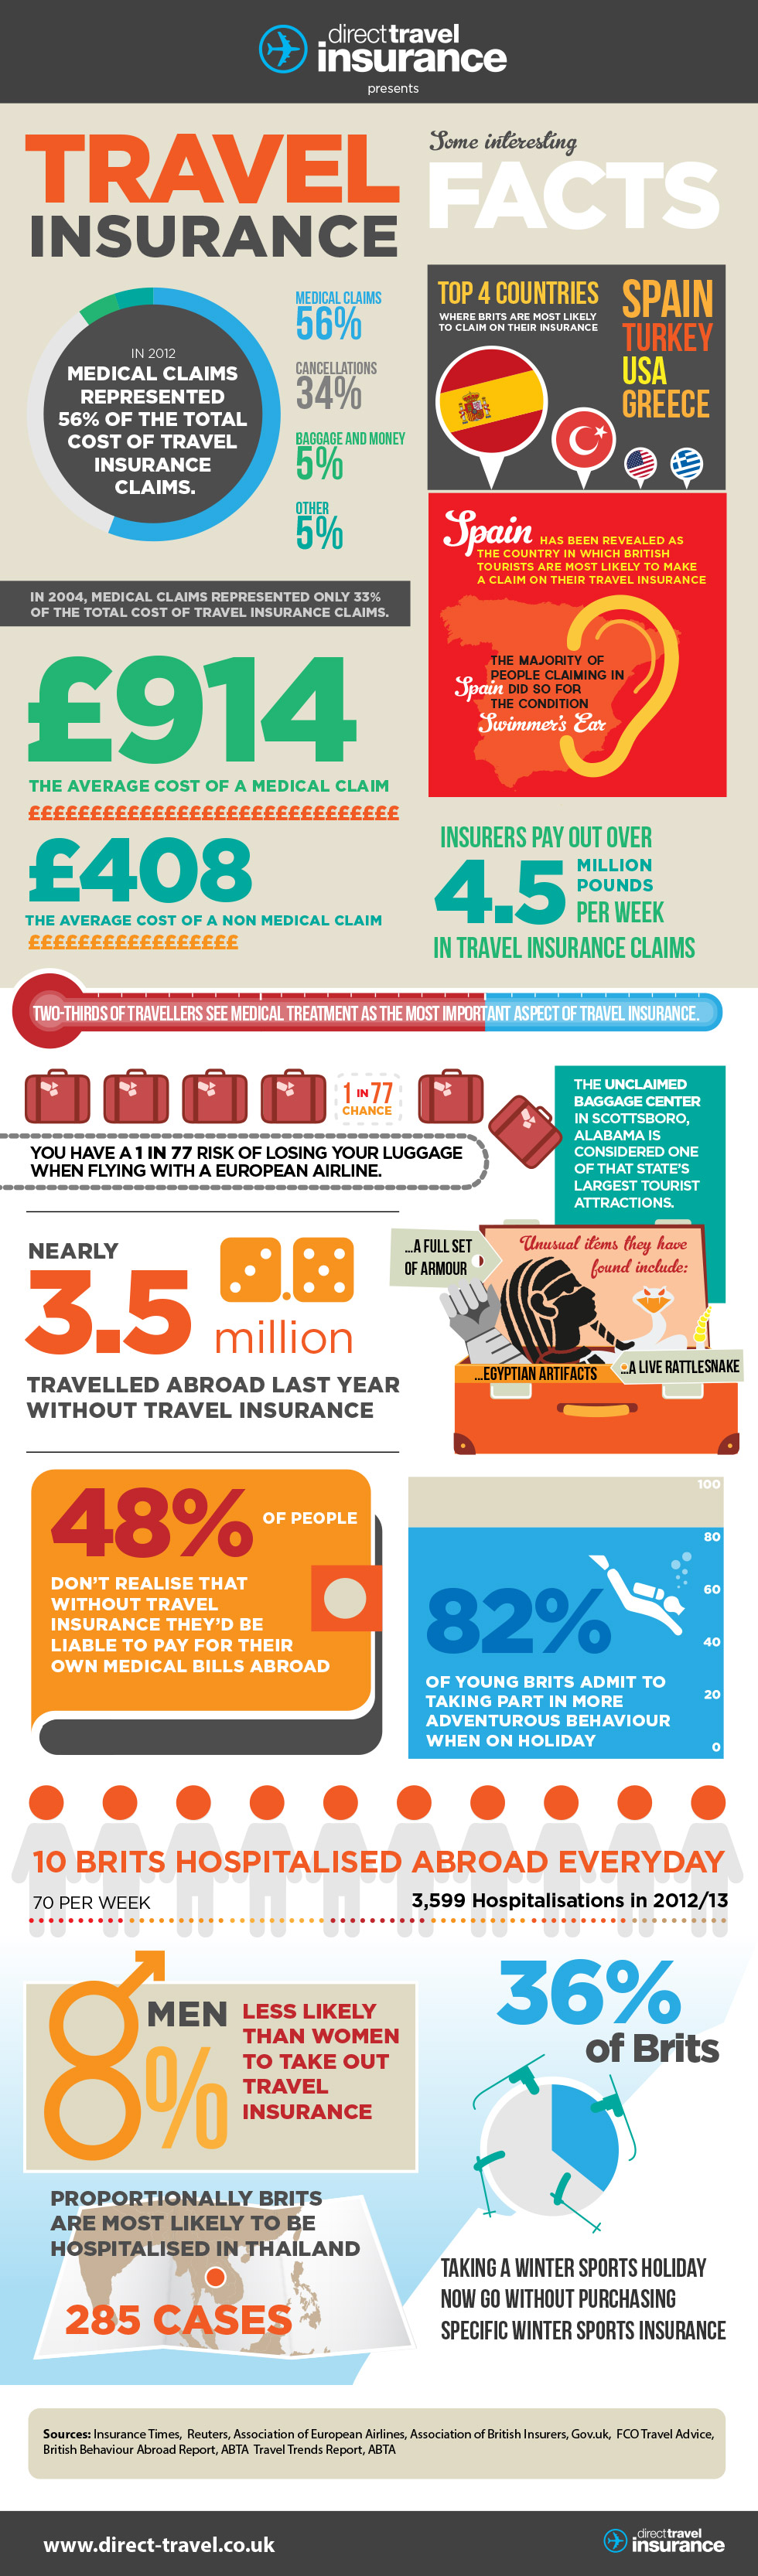 Direct Travel Insurance facts infographic